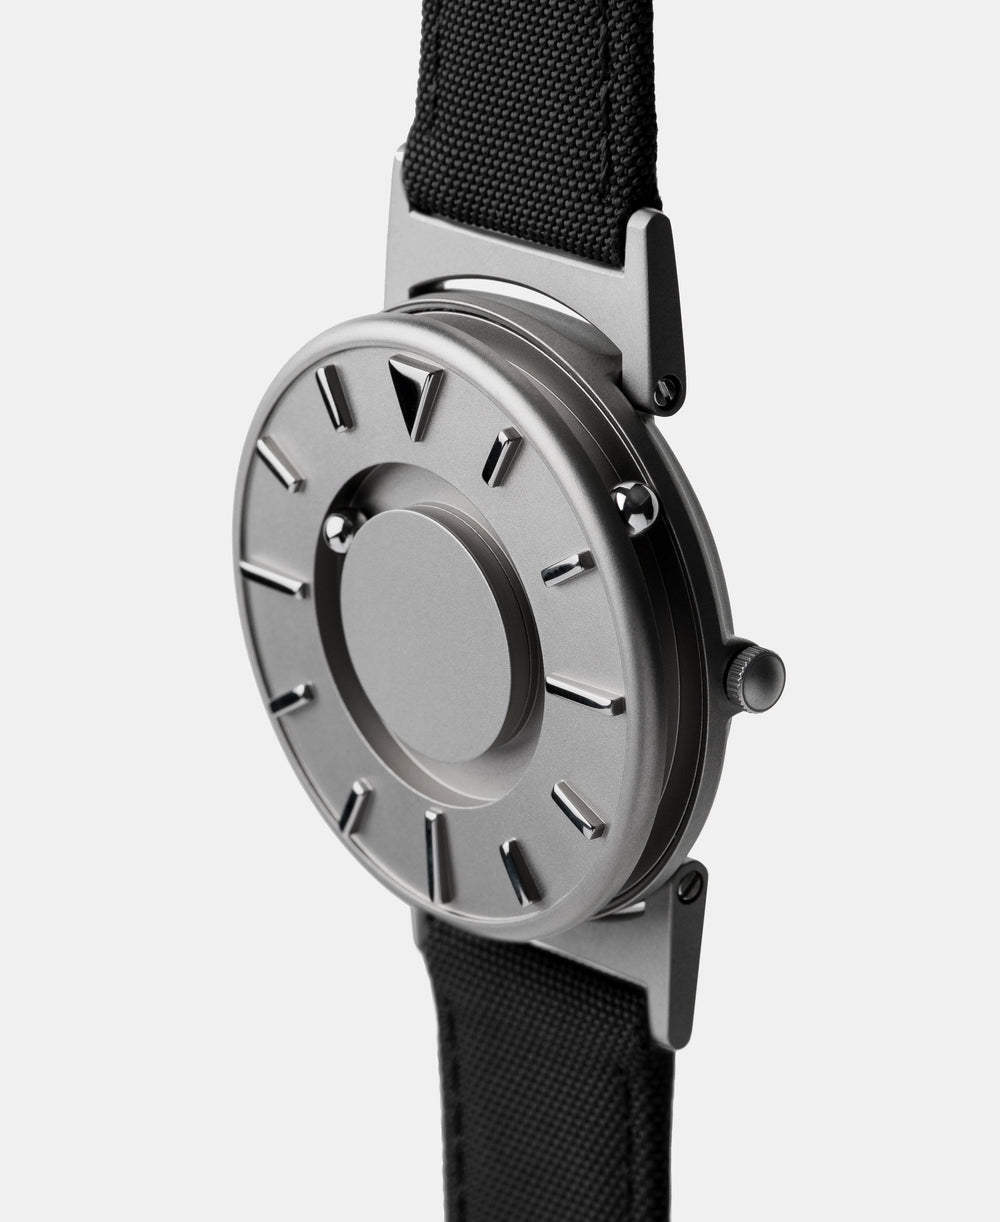 A photo of the watch from a side angle. The recessed track around the outside of the watch face is shown with the hour ball bearing in the track. The raised markers are noticeable from this perspective.